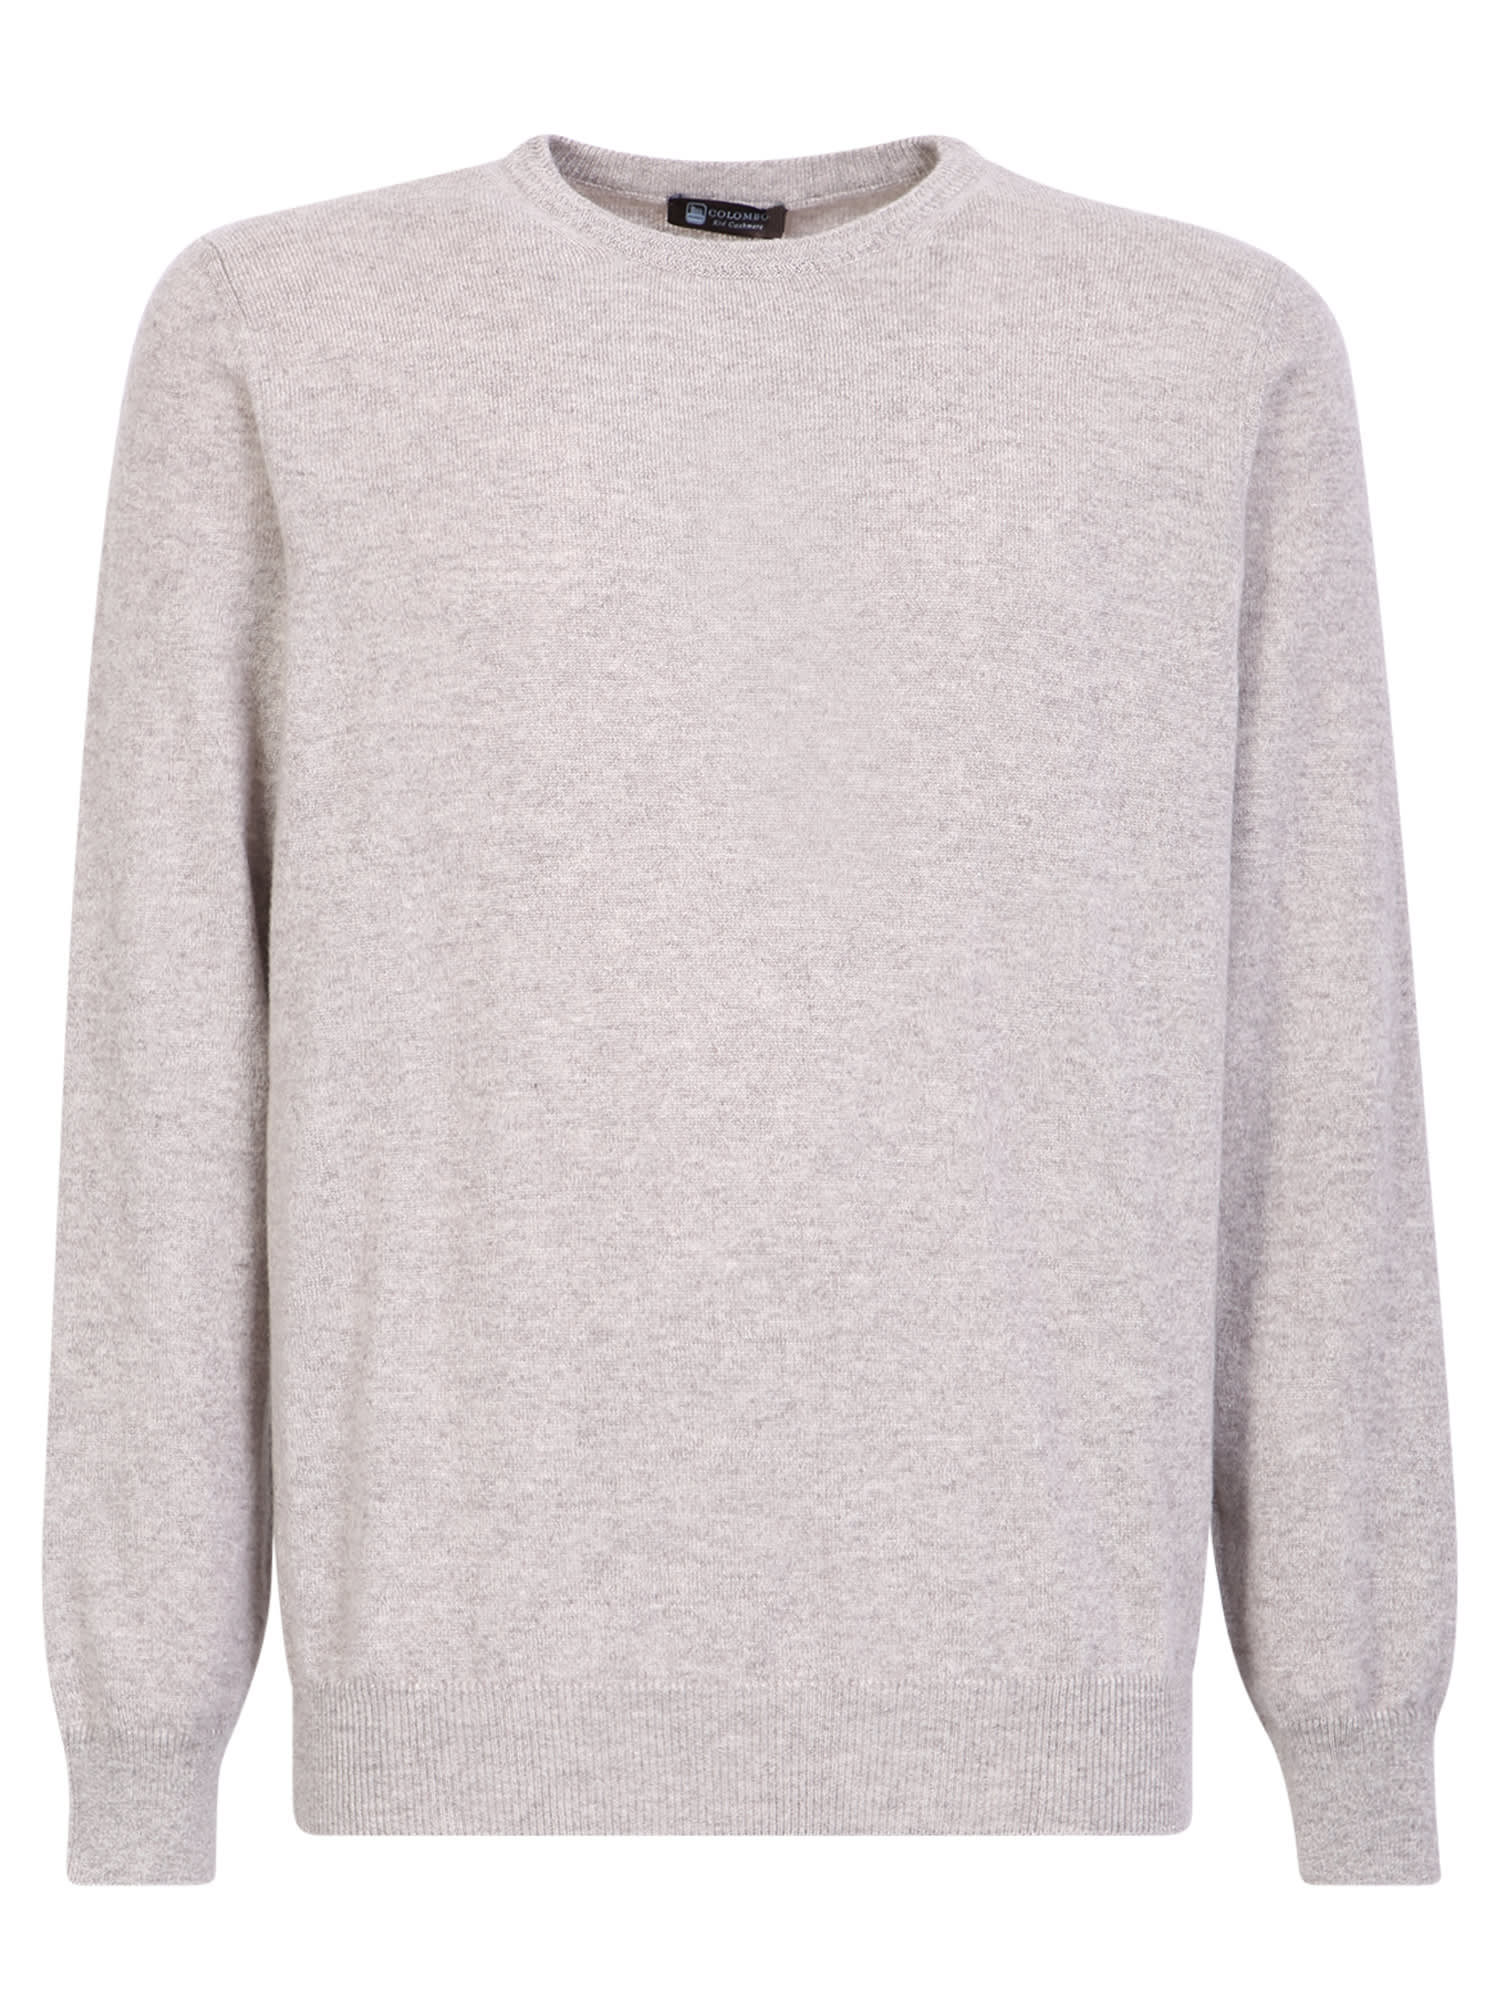 Colombo Beige Cashmere Sweater